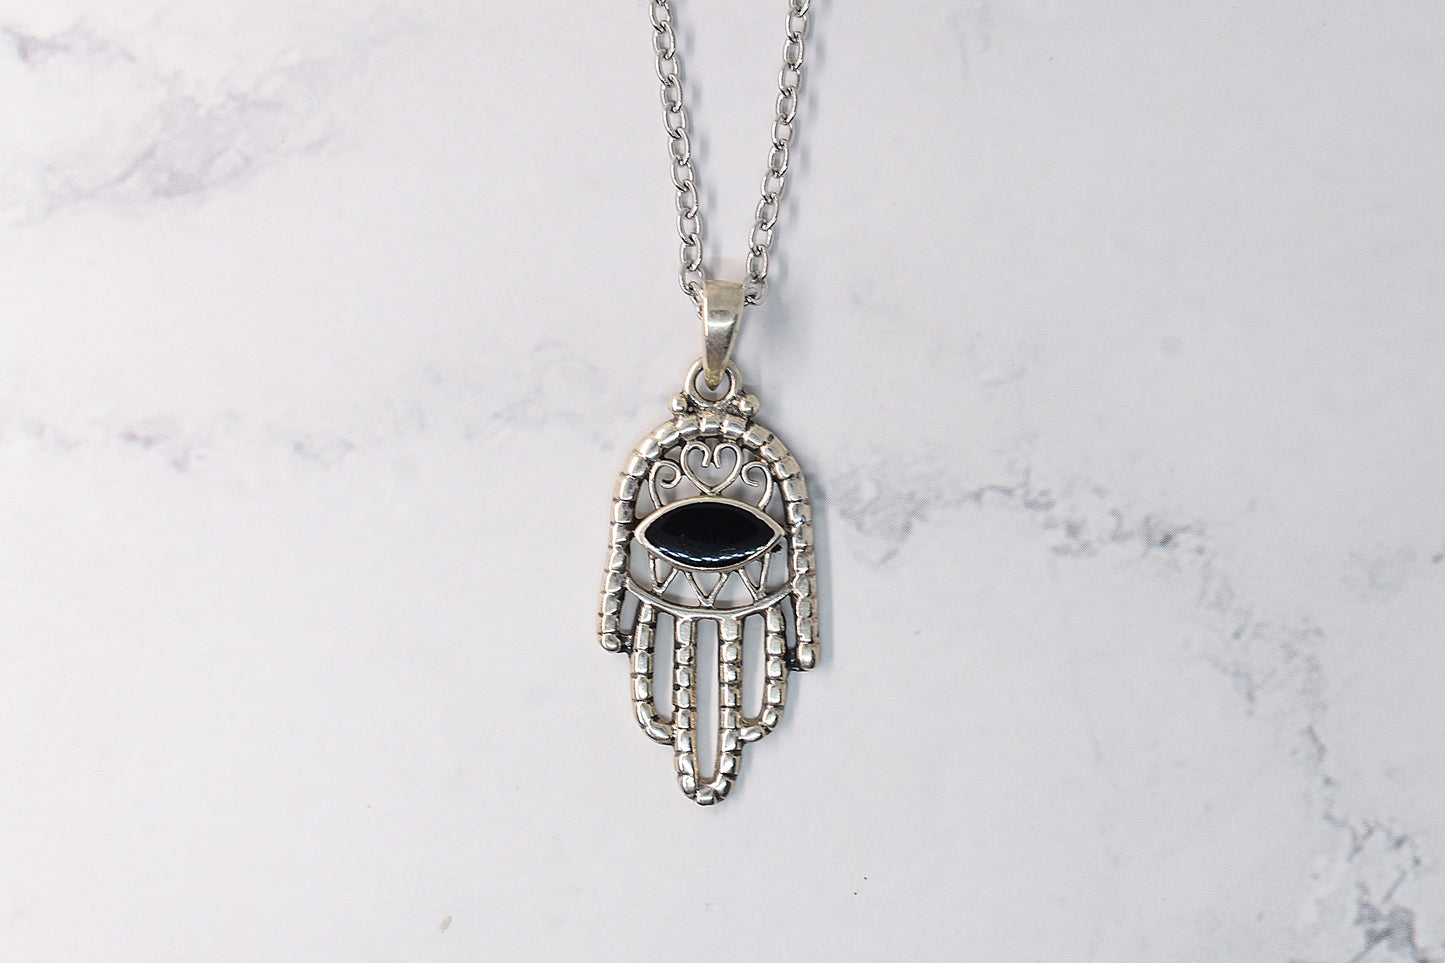 Hand of Fatima pendant in 925 sterling silver with onyx stone